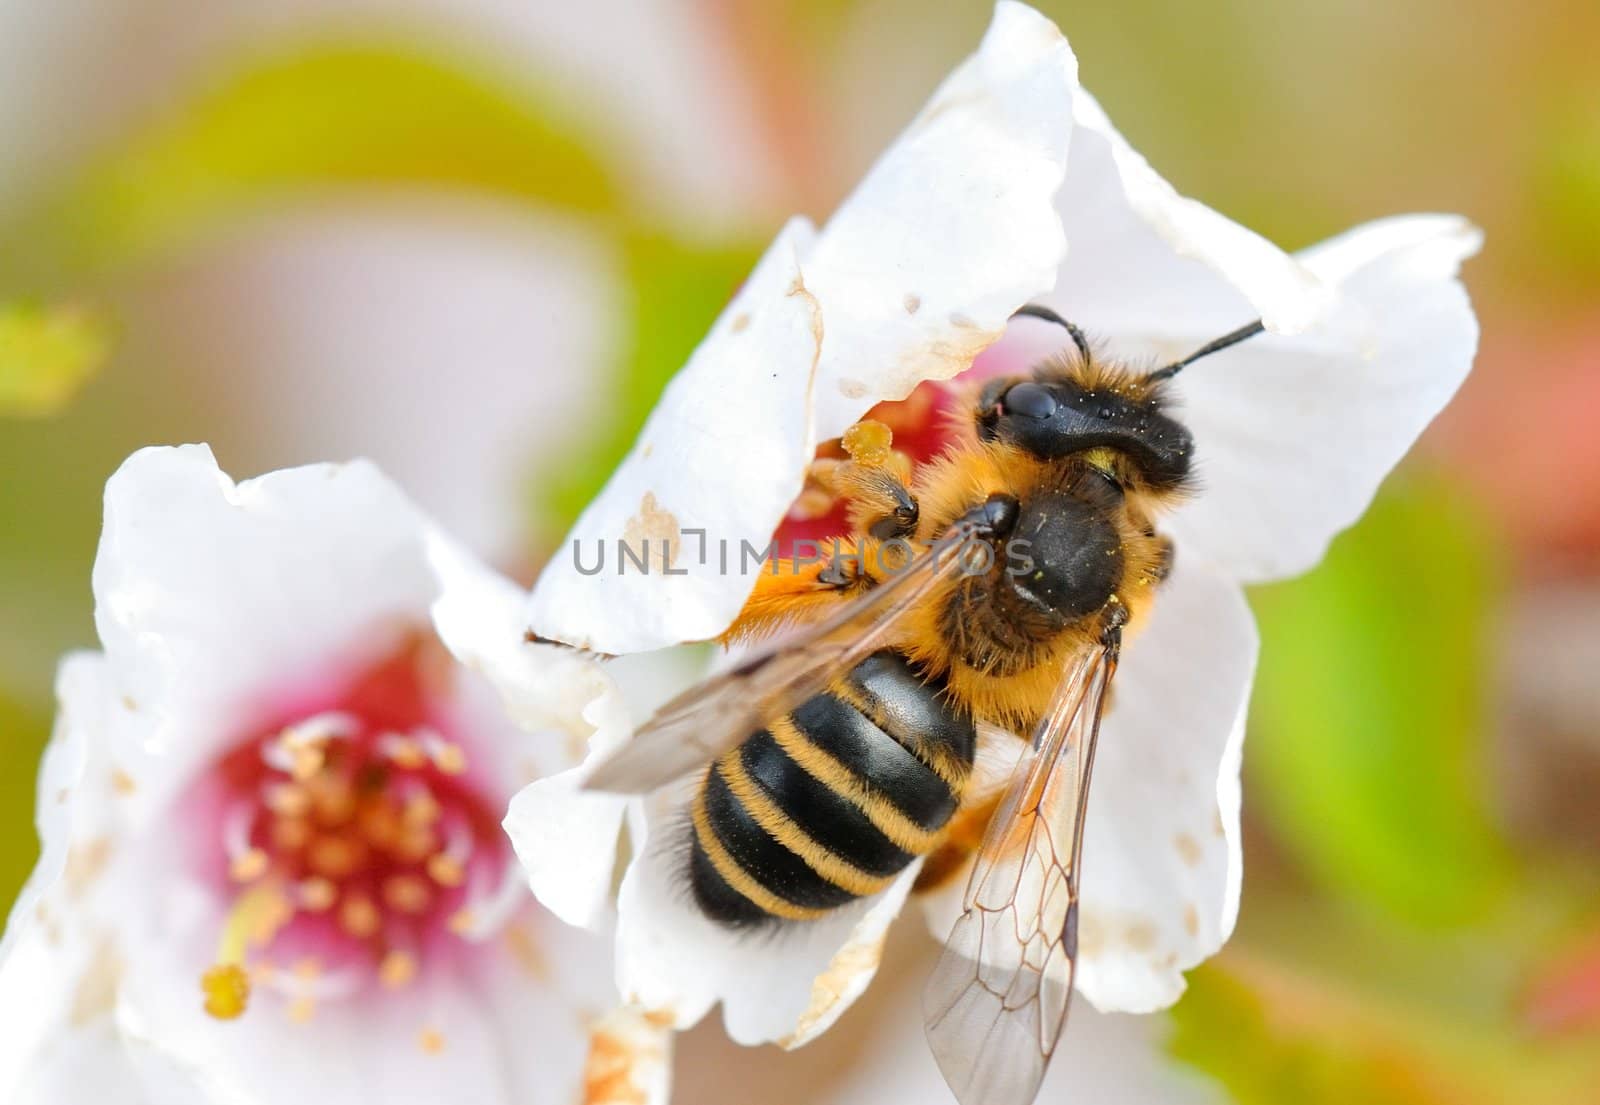 A close-up of a honey bee in a white flower.